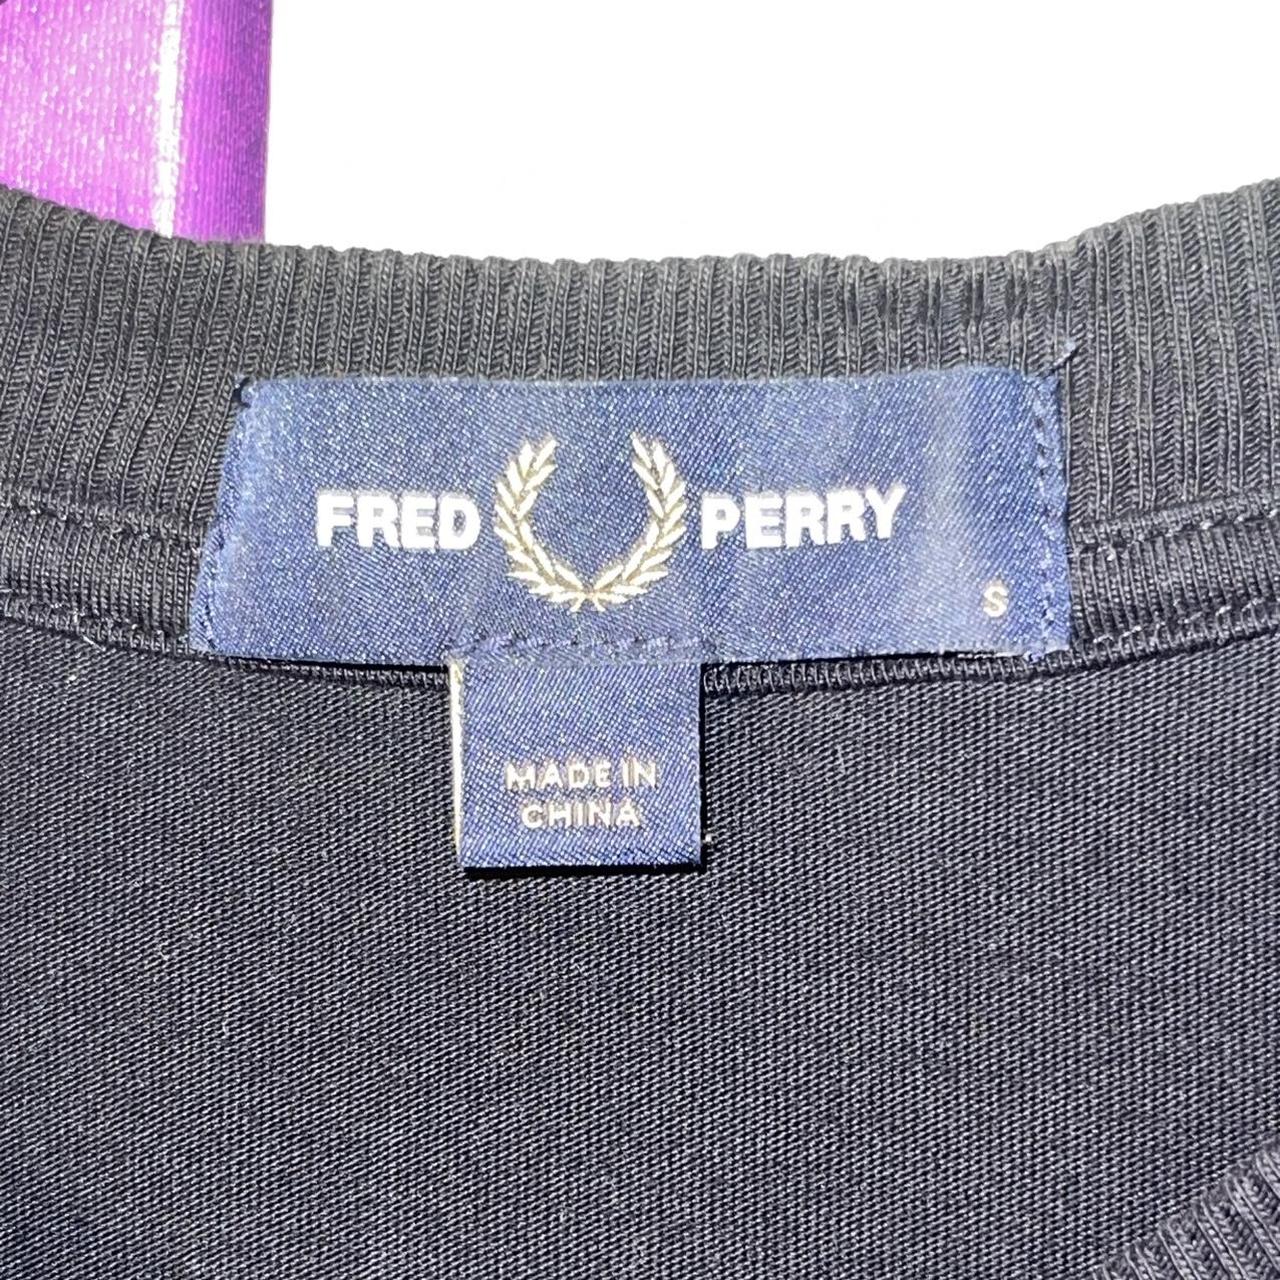 Fred Perry Black Small Tee Shirt - Depop